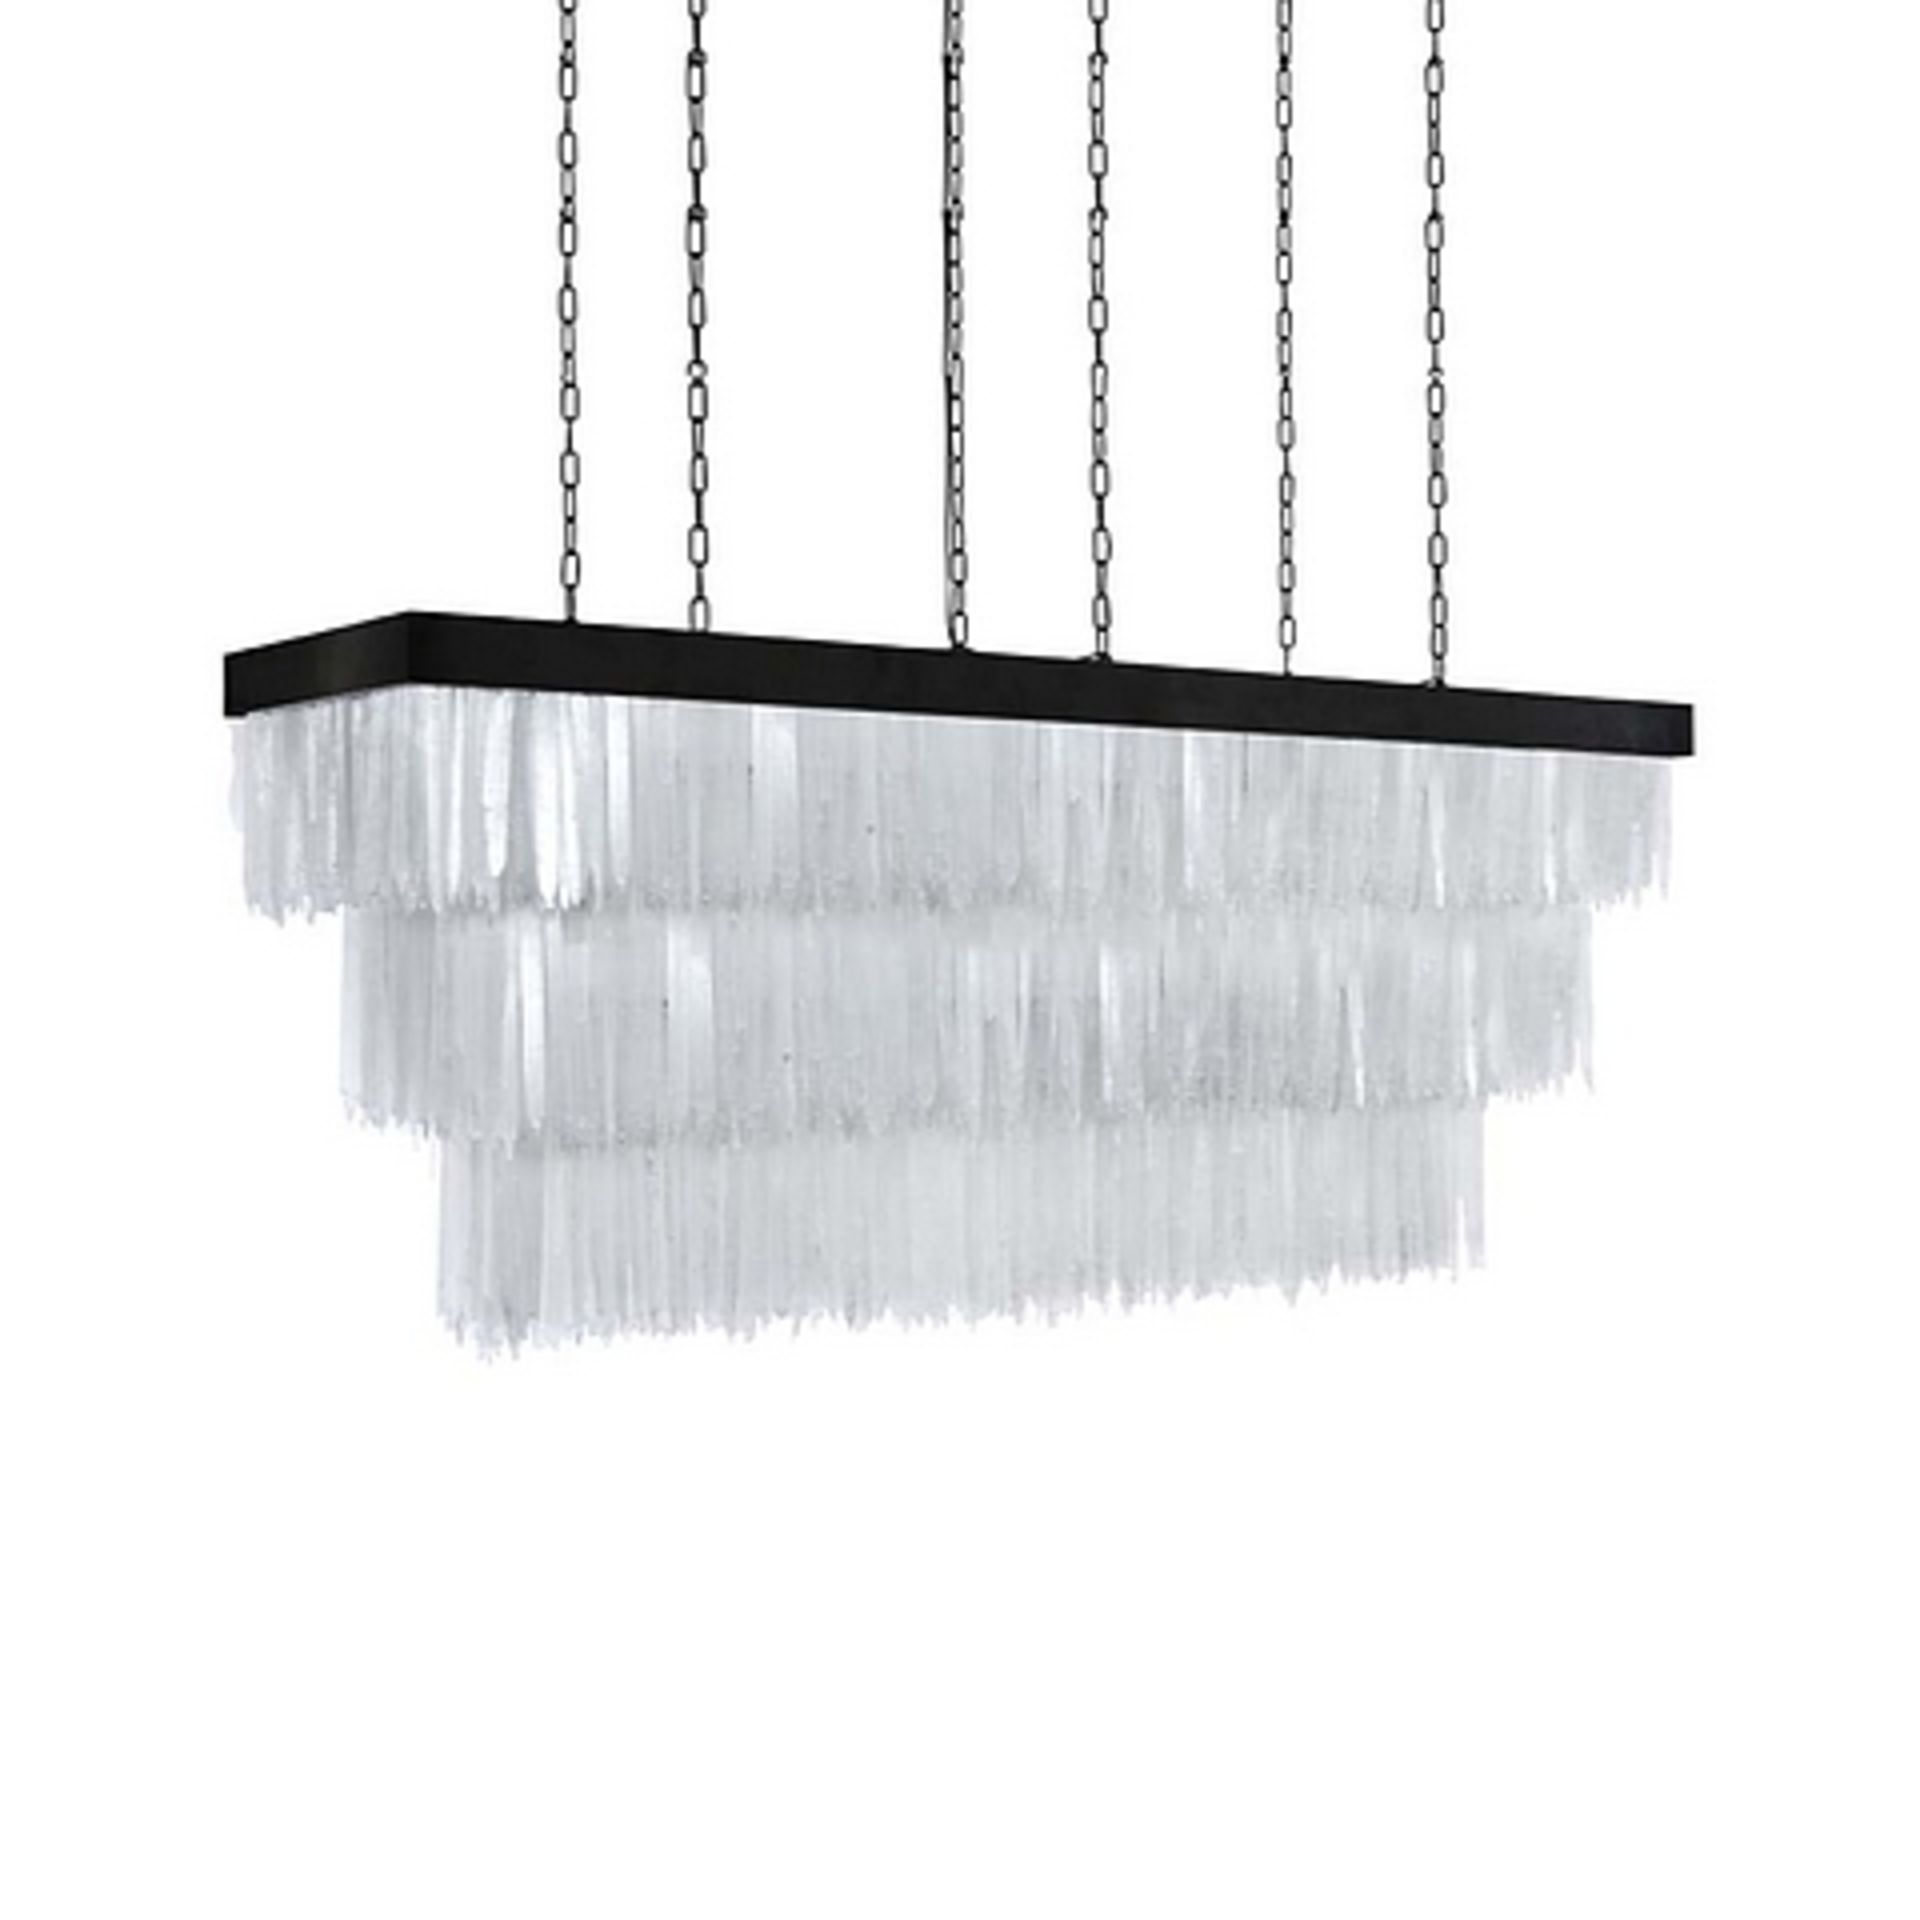 A Hanging Selenite Chandelier Lamp, rectangular in shape and in a black powder coating Finish with